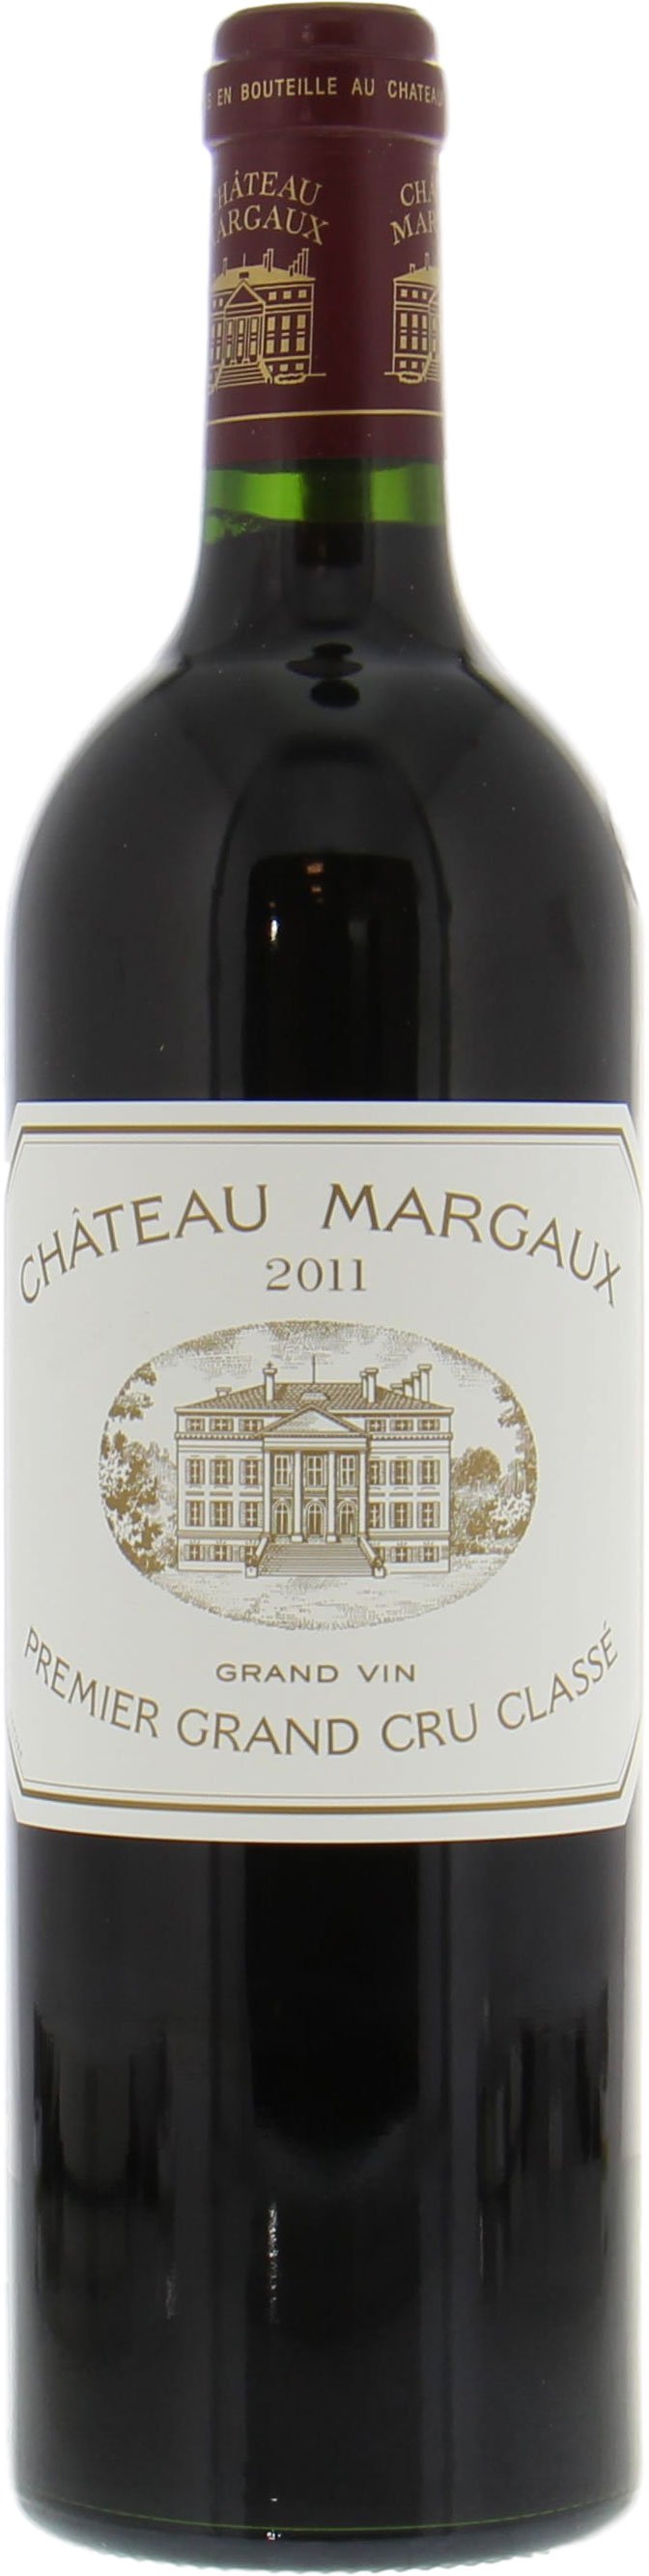 Chateau Margaux - Chateau Margaux 2011 From Original Wooden Case